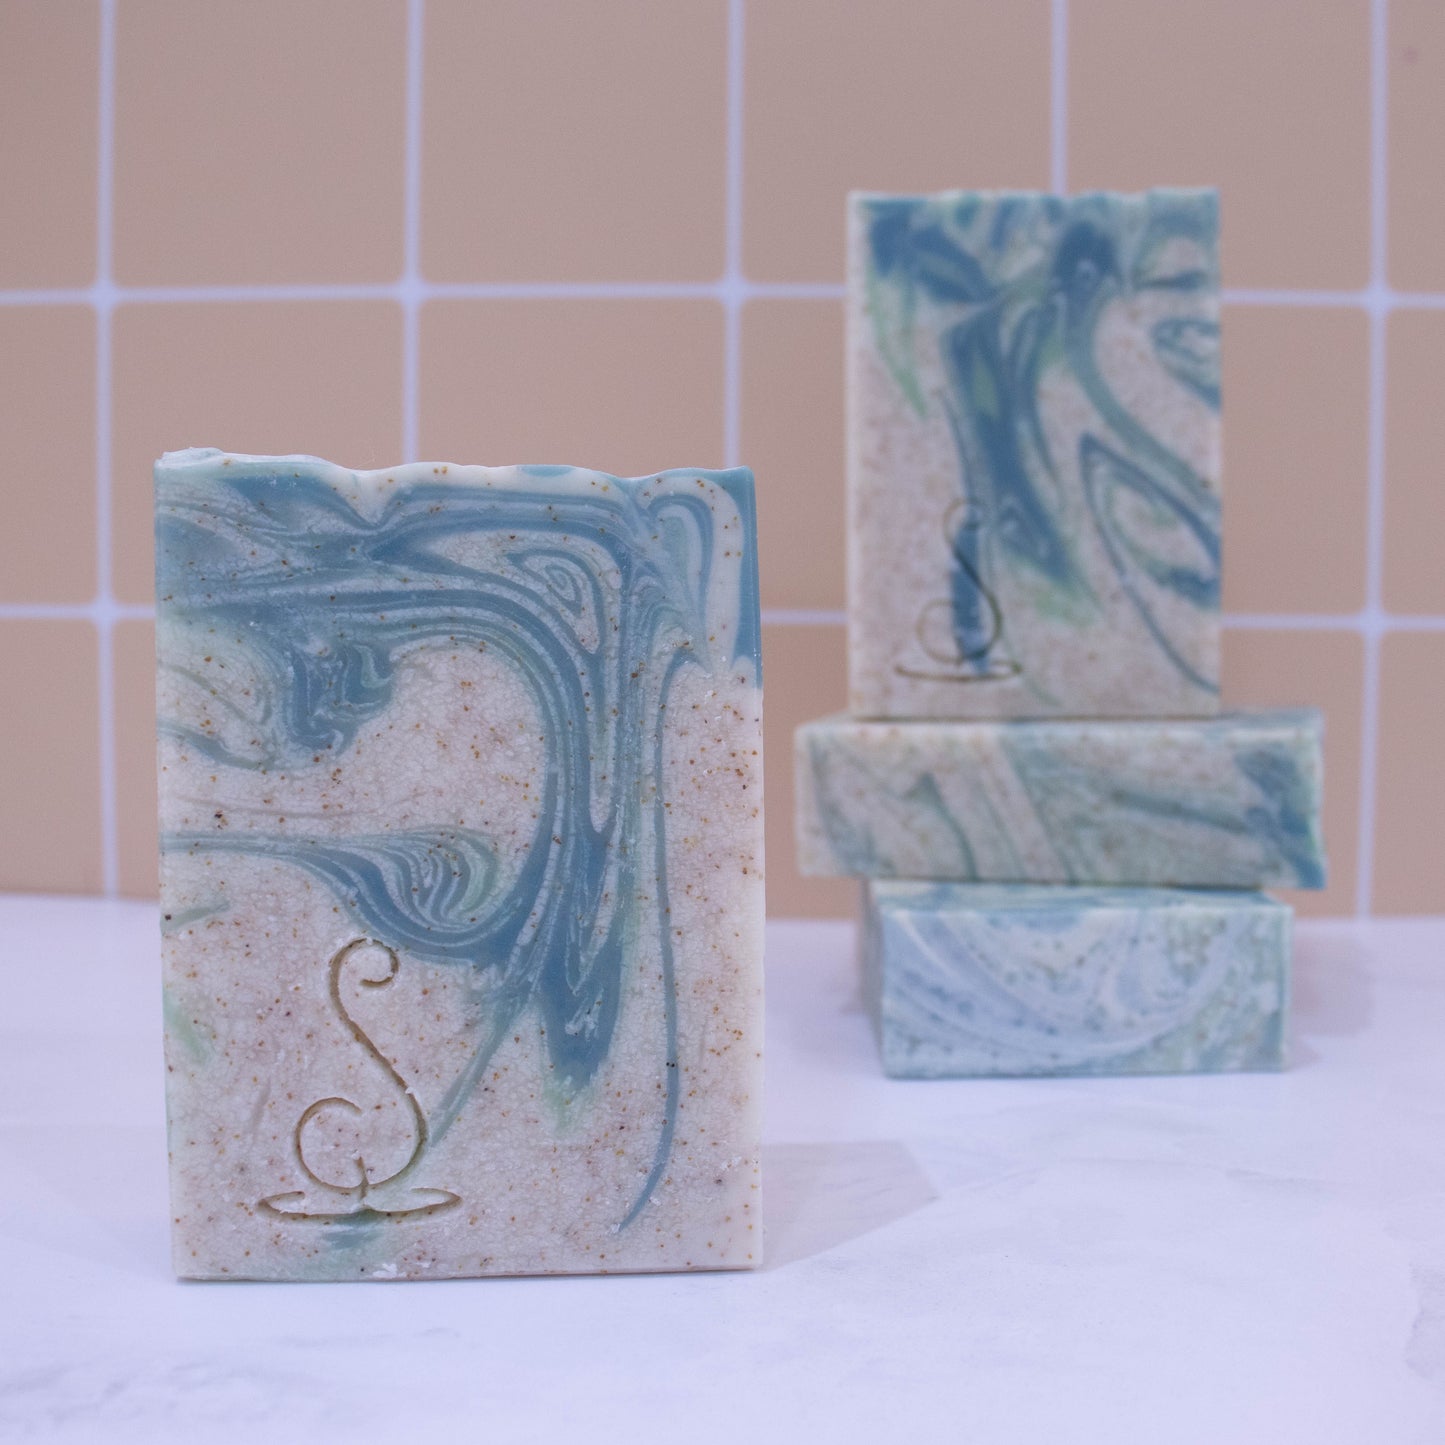 Four rectangular bars of soap sit on a marble bench each showing various design patterns from the same batch of soap. The soap is a cream colour with light and dark swirls.  Throughout the soap are tiny brown speckles.  All soaps have a similar pattern but all have slight differences